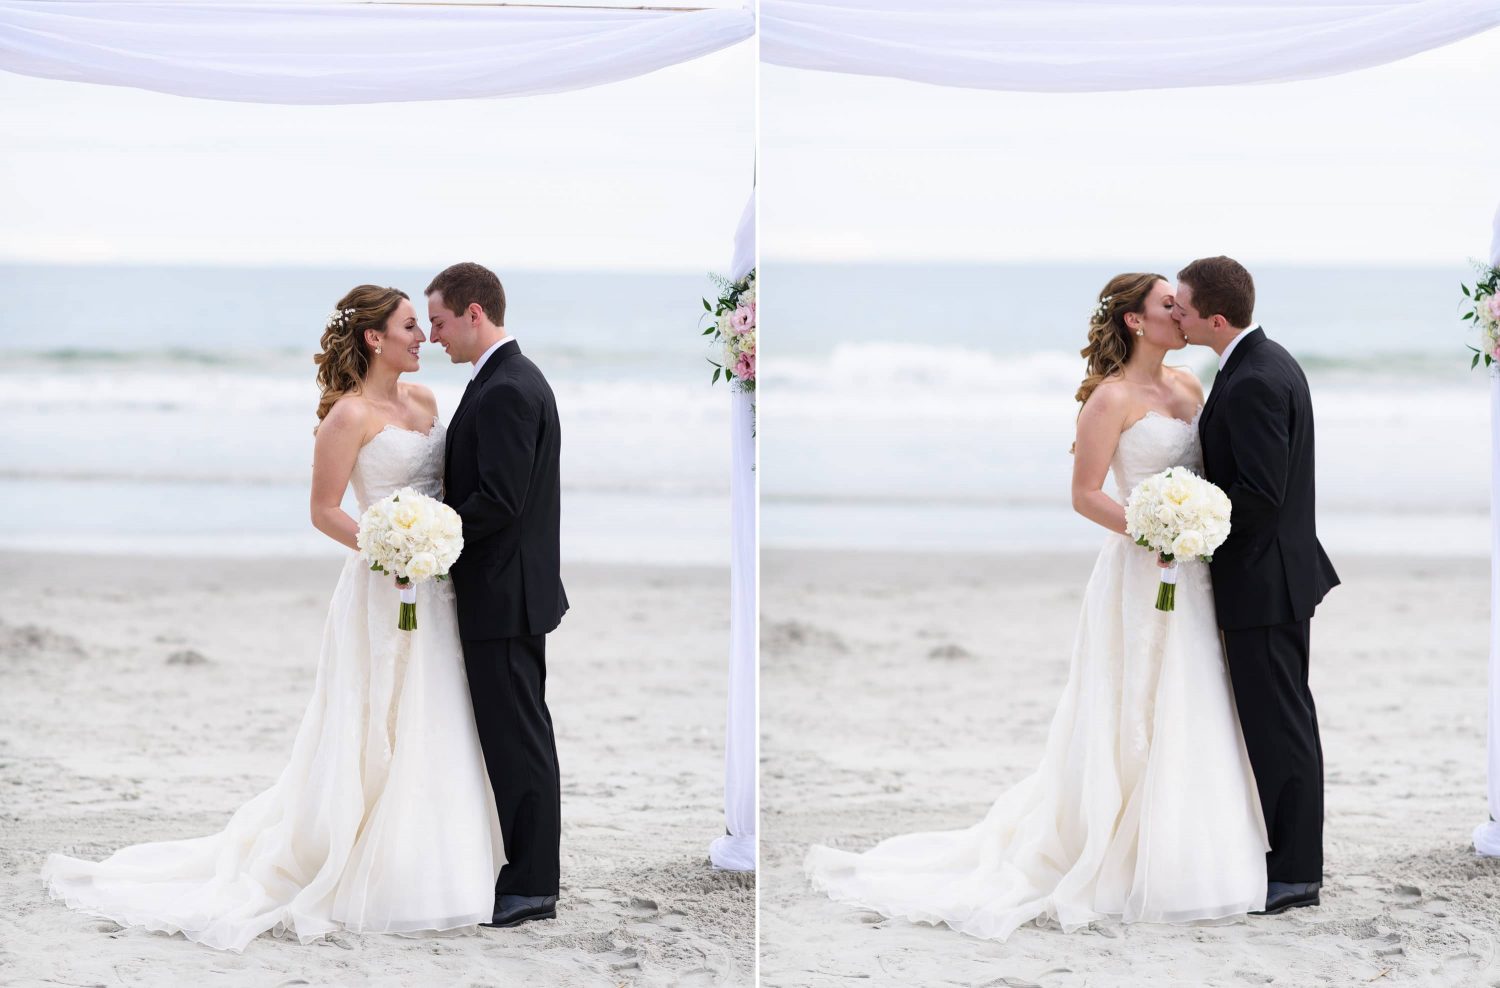 Kiss in front of the ocean